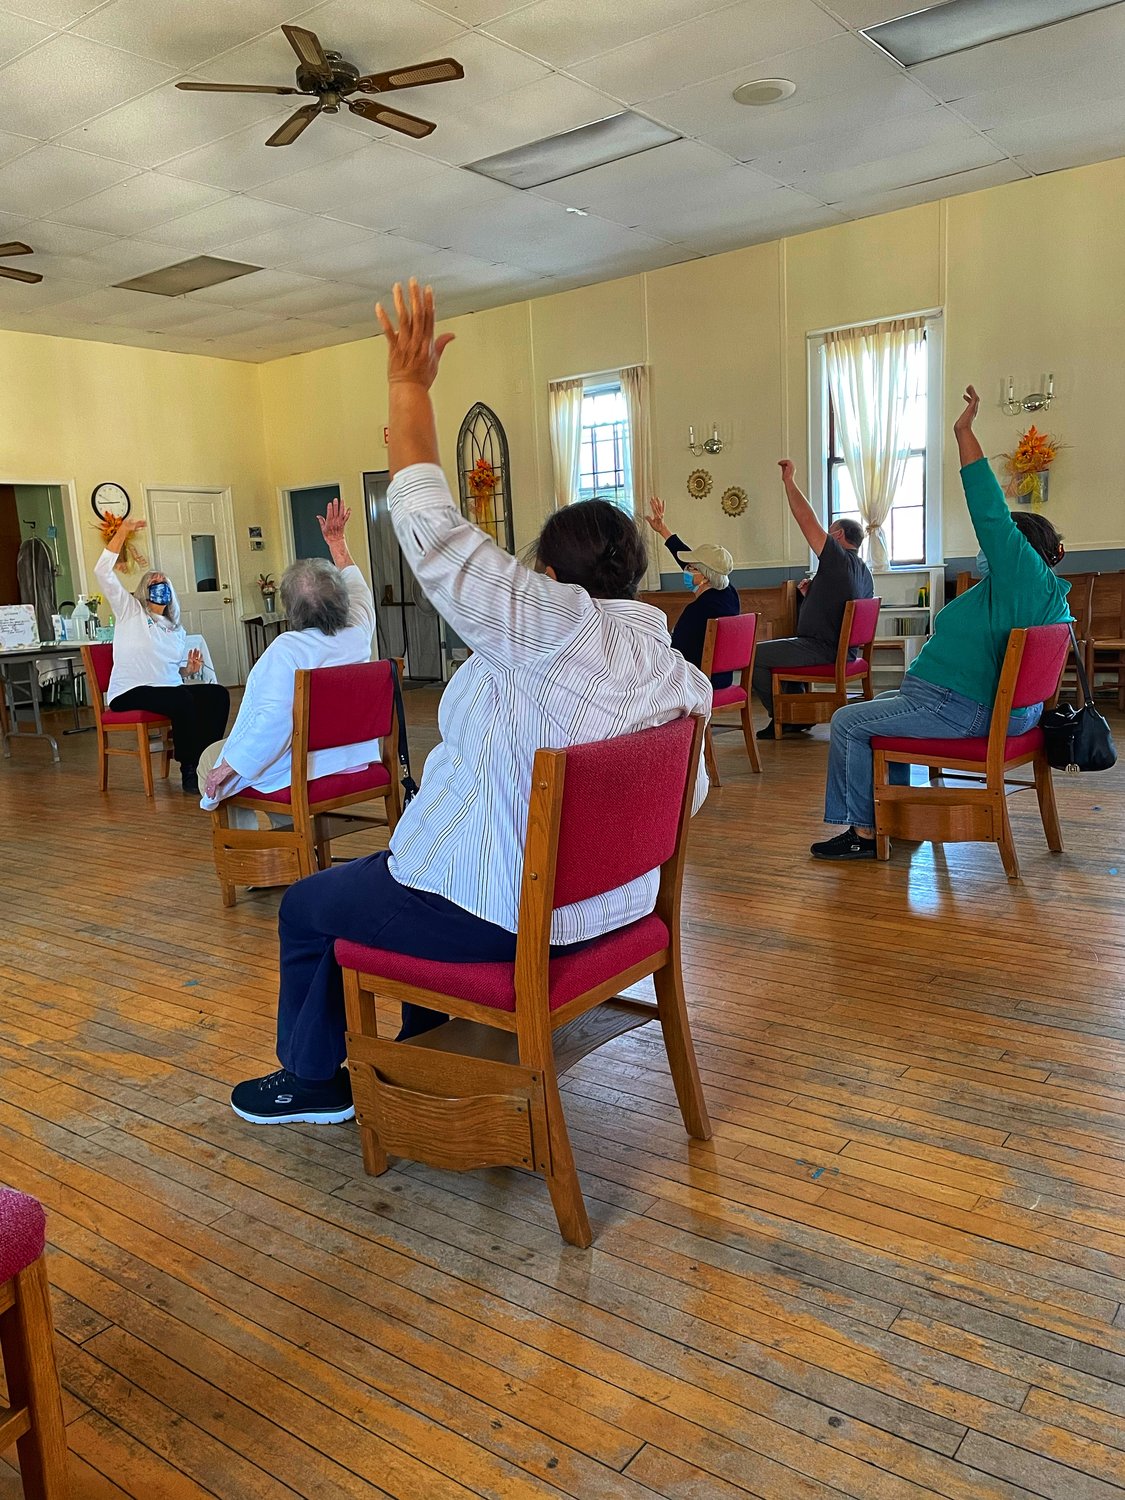 Seniors can now take part in free chair yoga classes at the St. Francis Episcopal Church in North Bellmore.